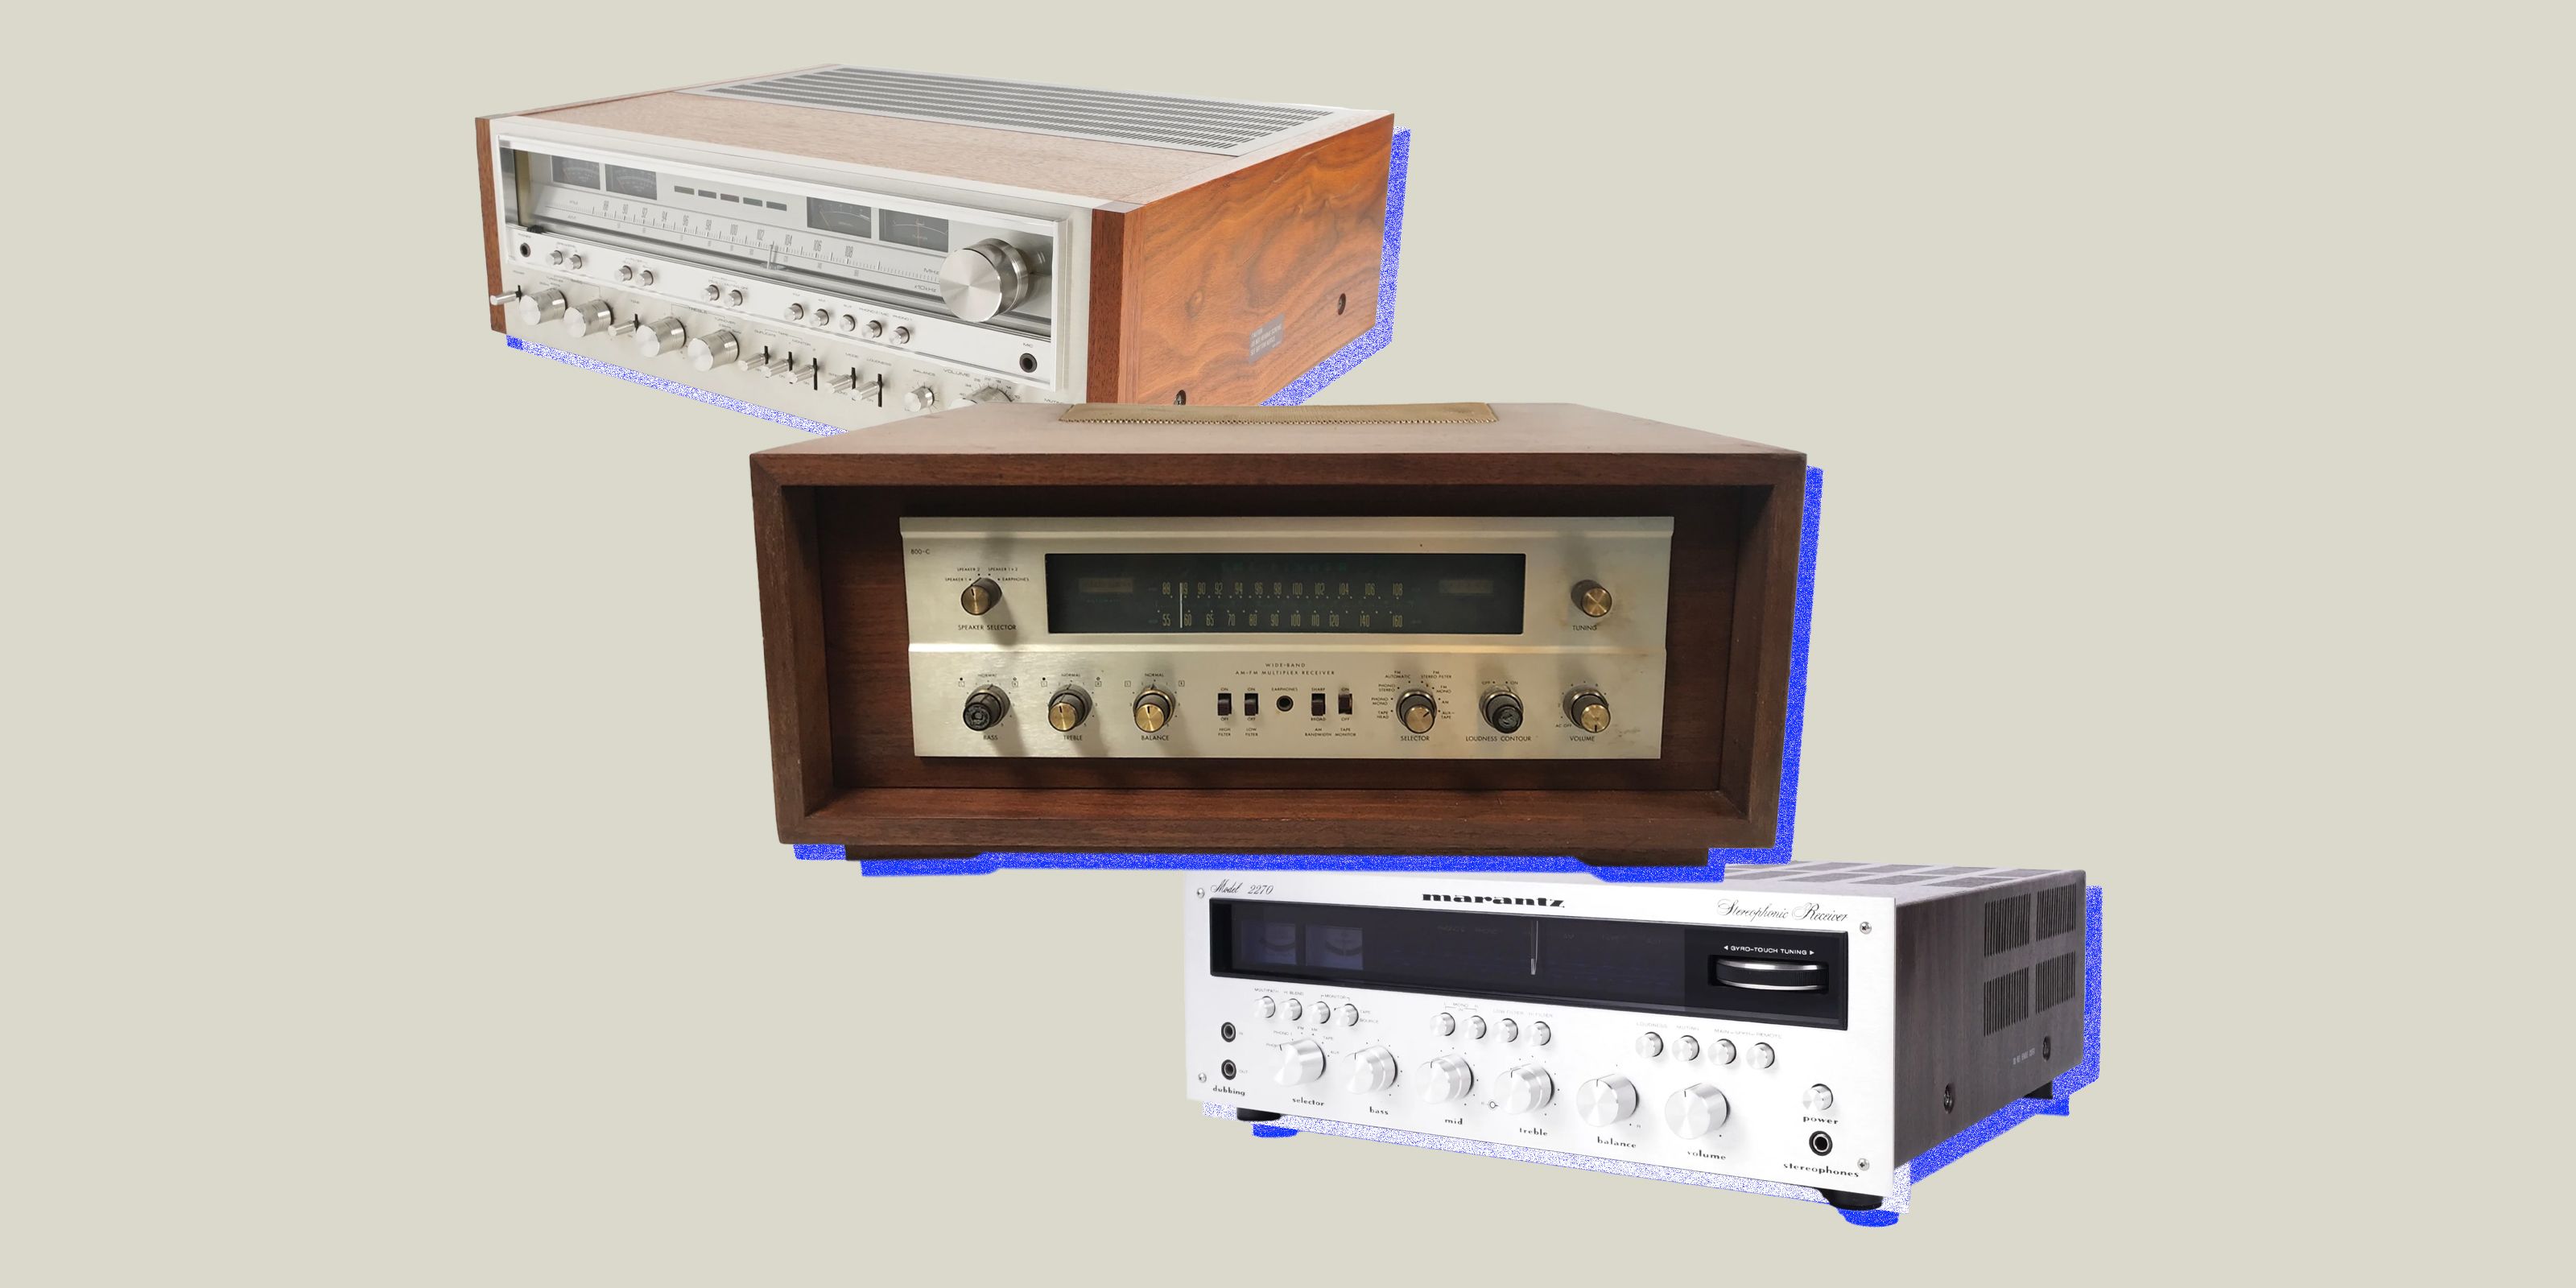 The Most Popular Vintage Stereo Receivers, Picked By the Experts